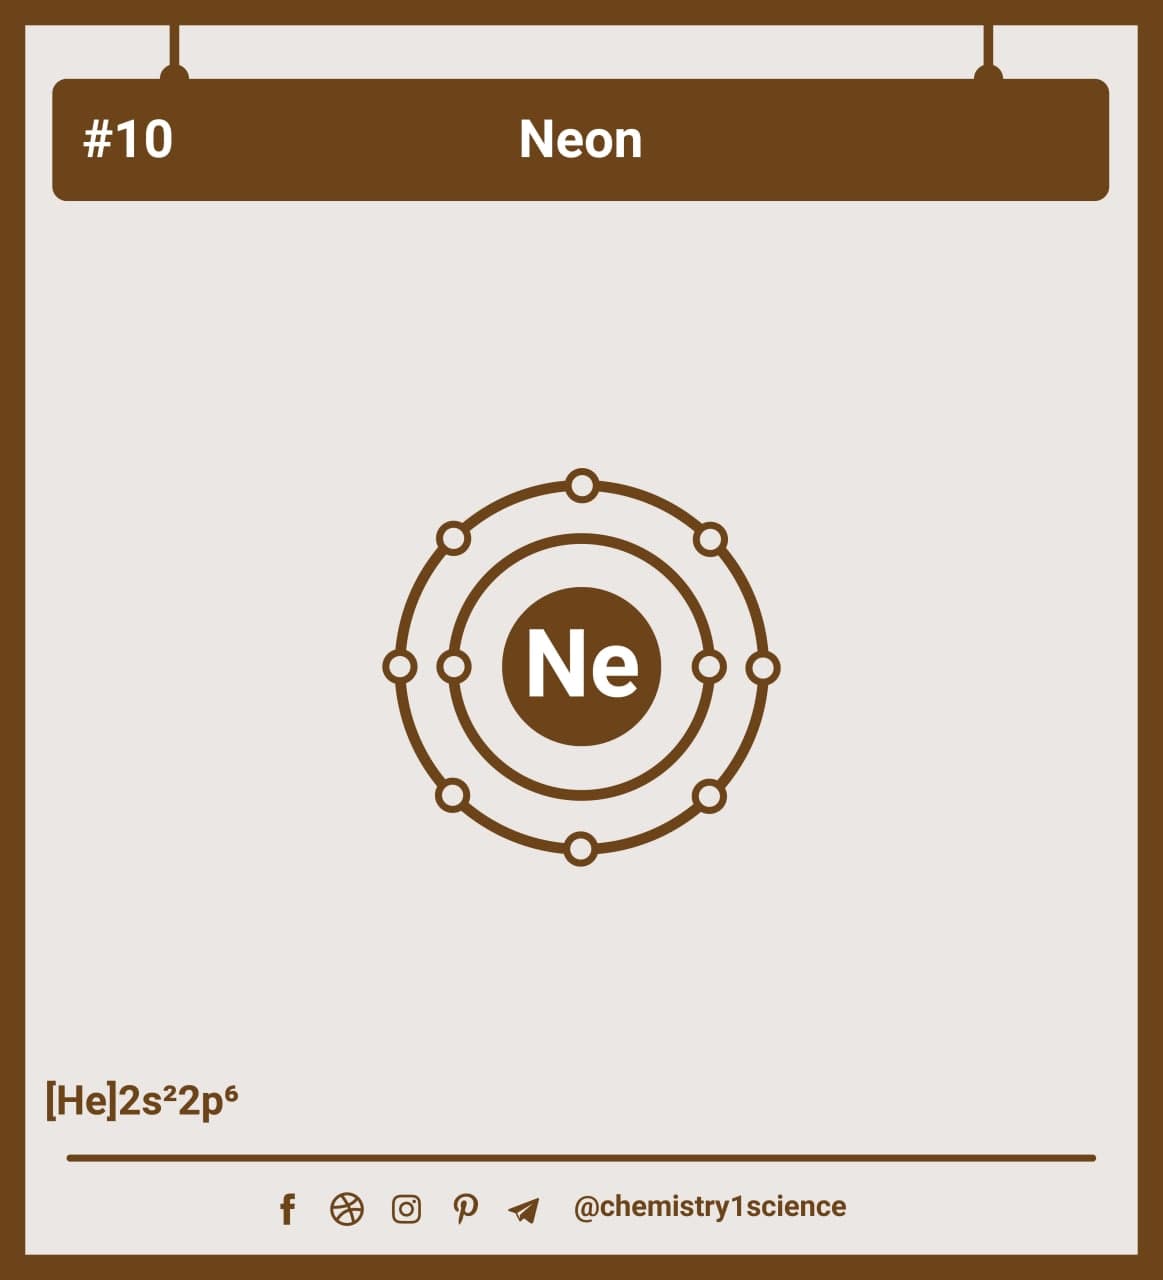 Atom Diagrams Showing Electron Shell Configurations of the Neon